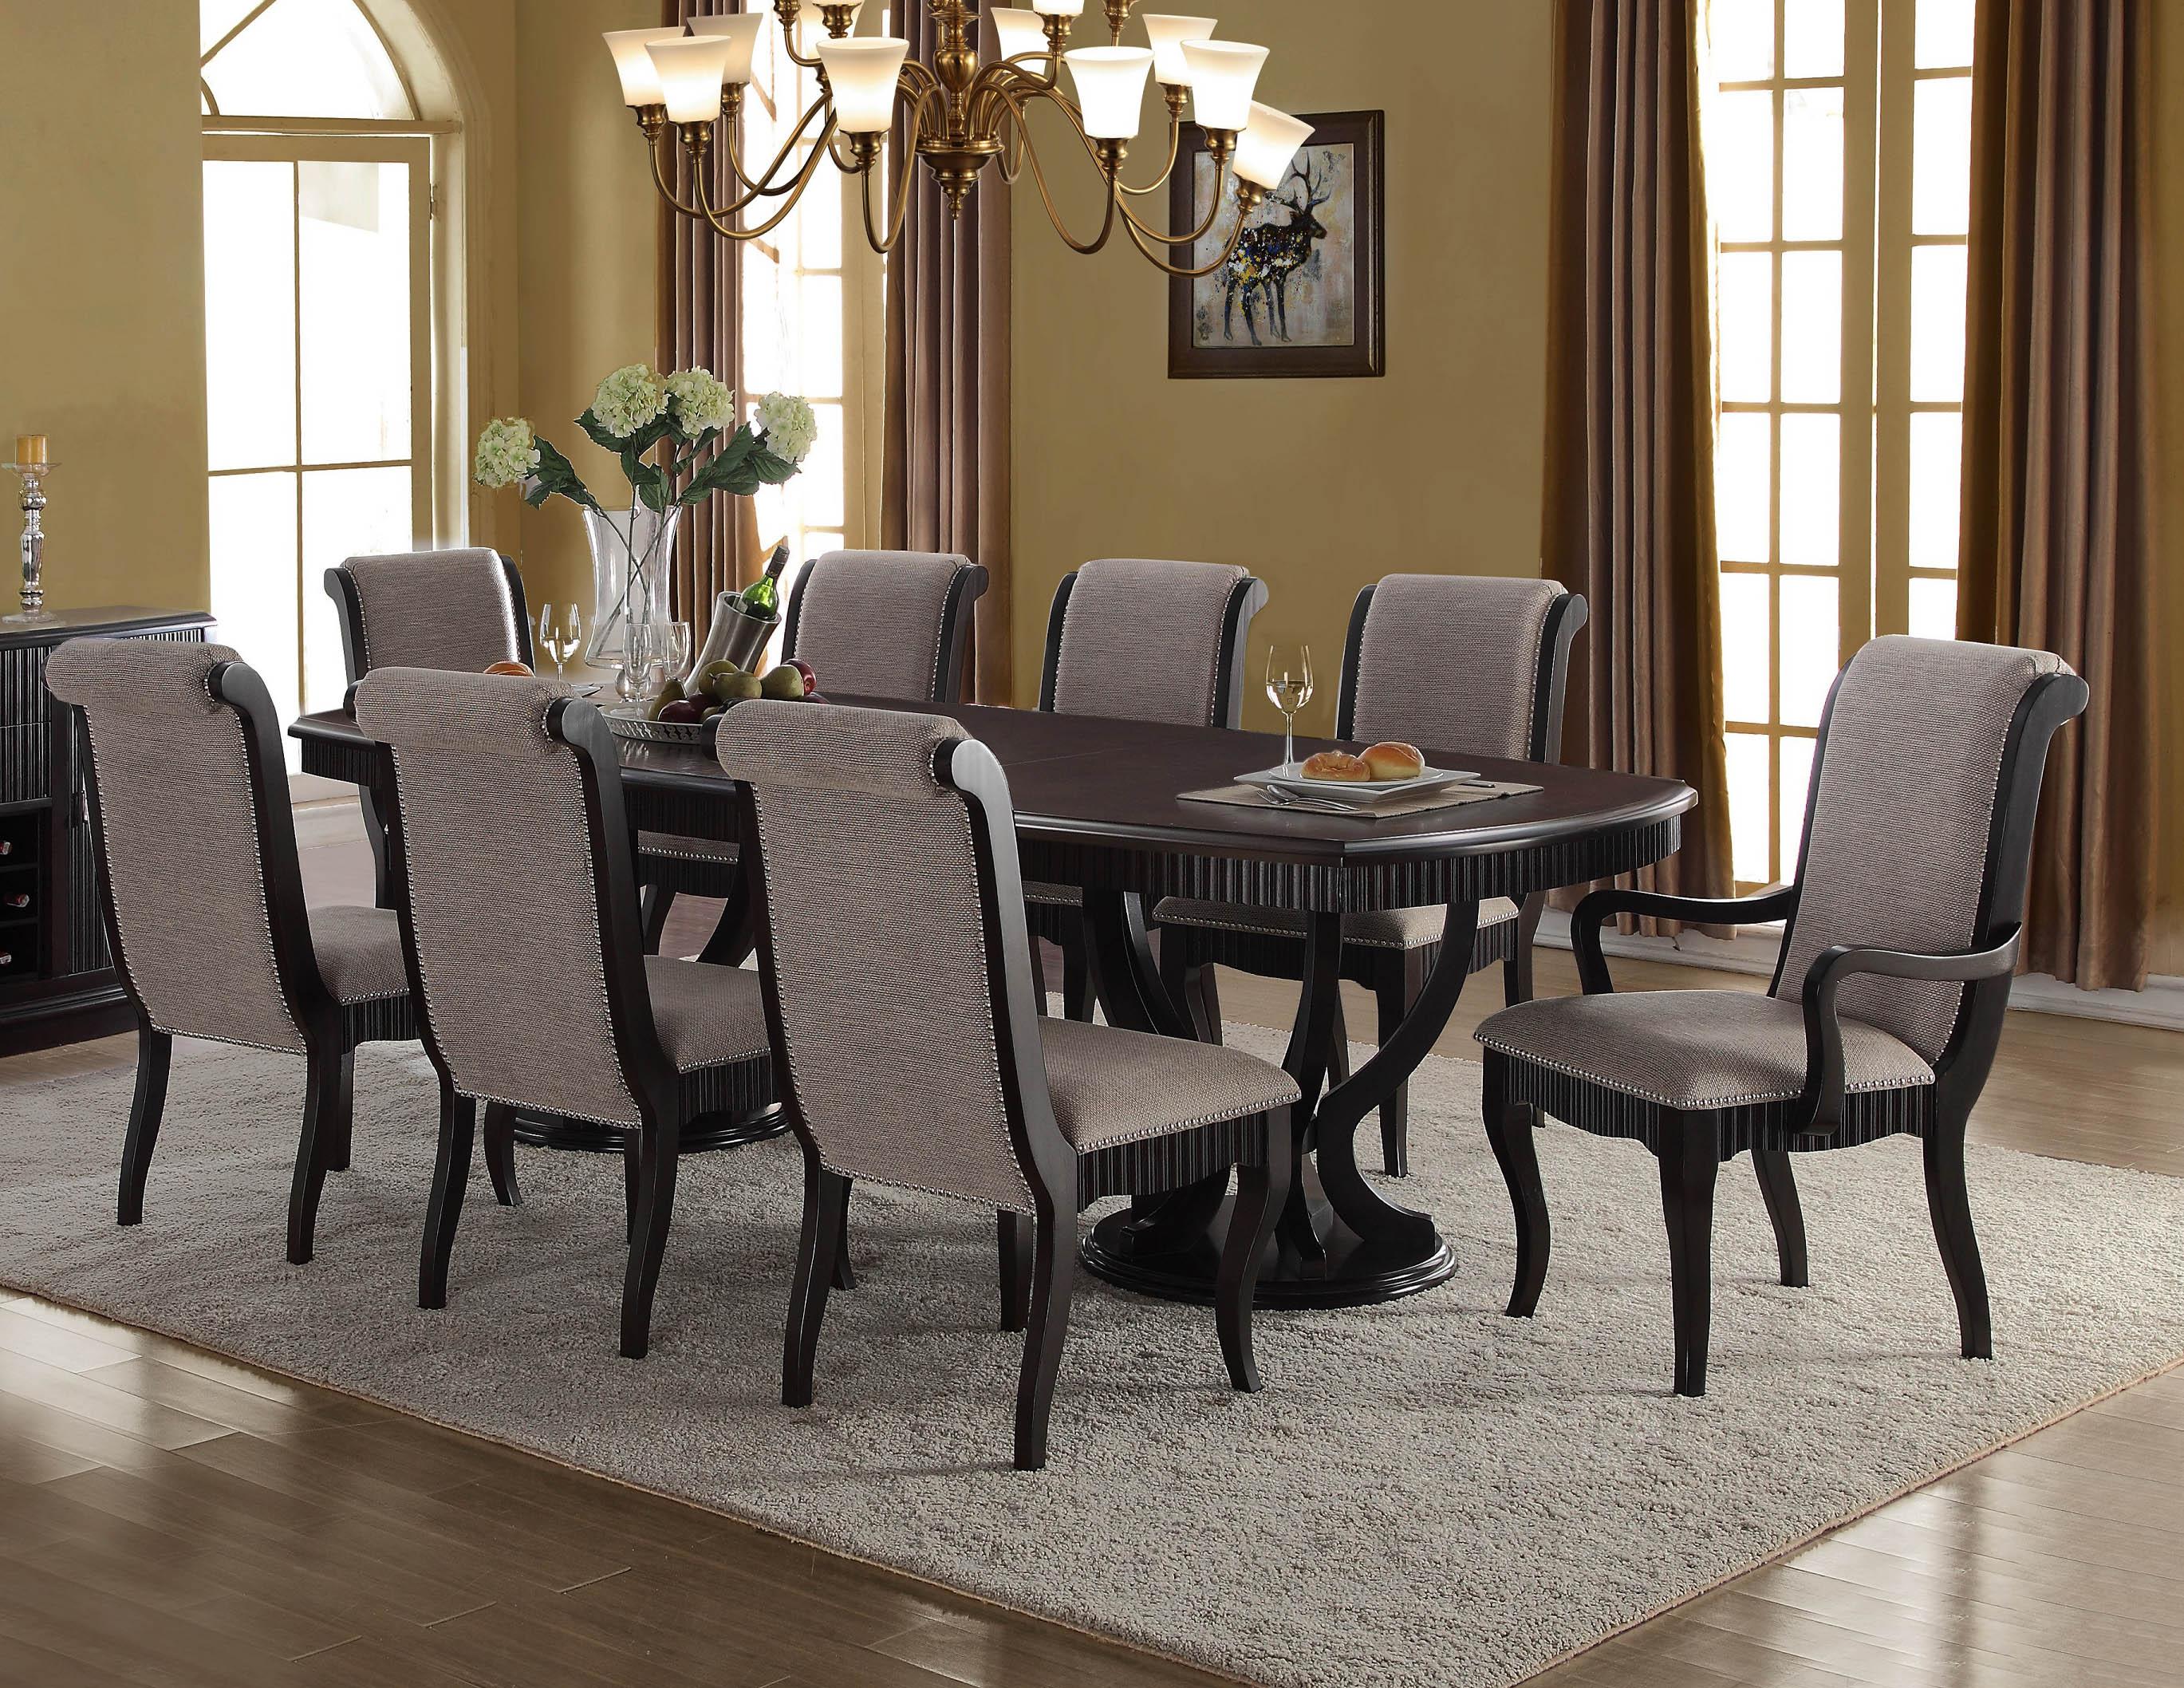 Classic Dining Room Set D1600 D1600-9PC in Dark Brown, Gray Fabric